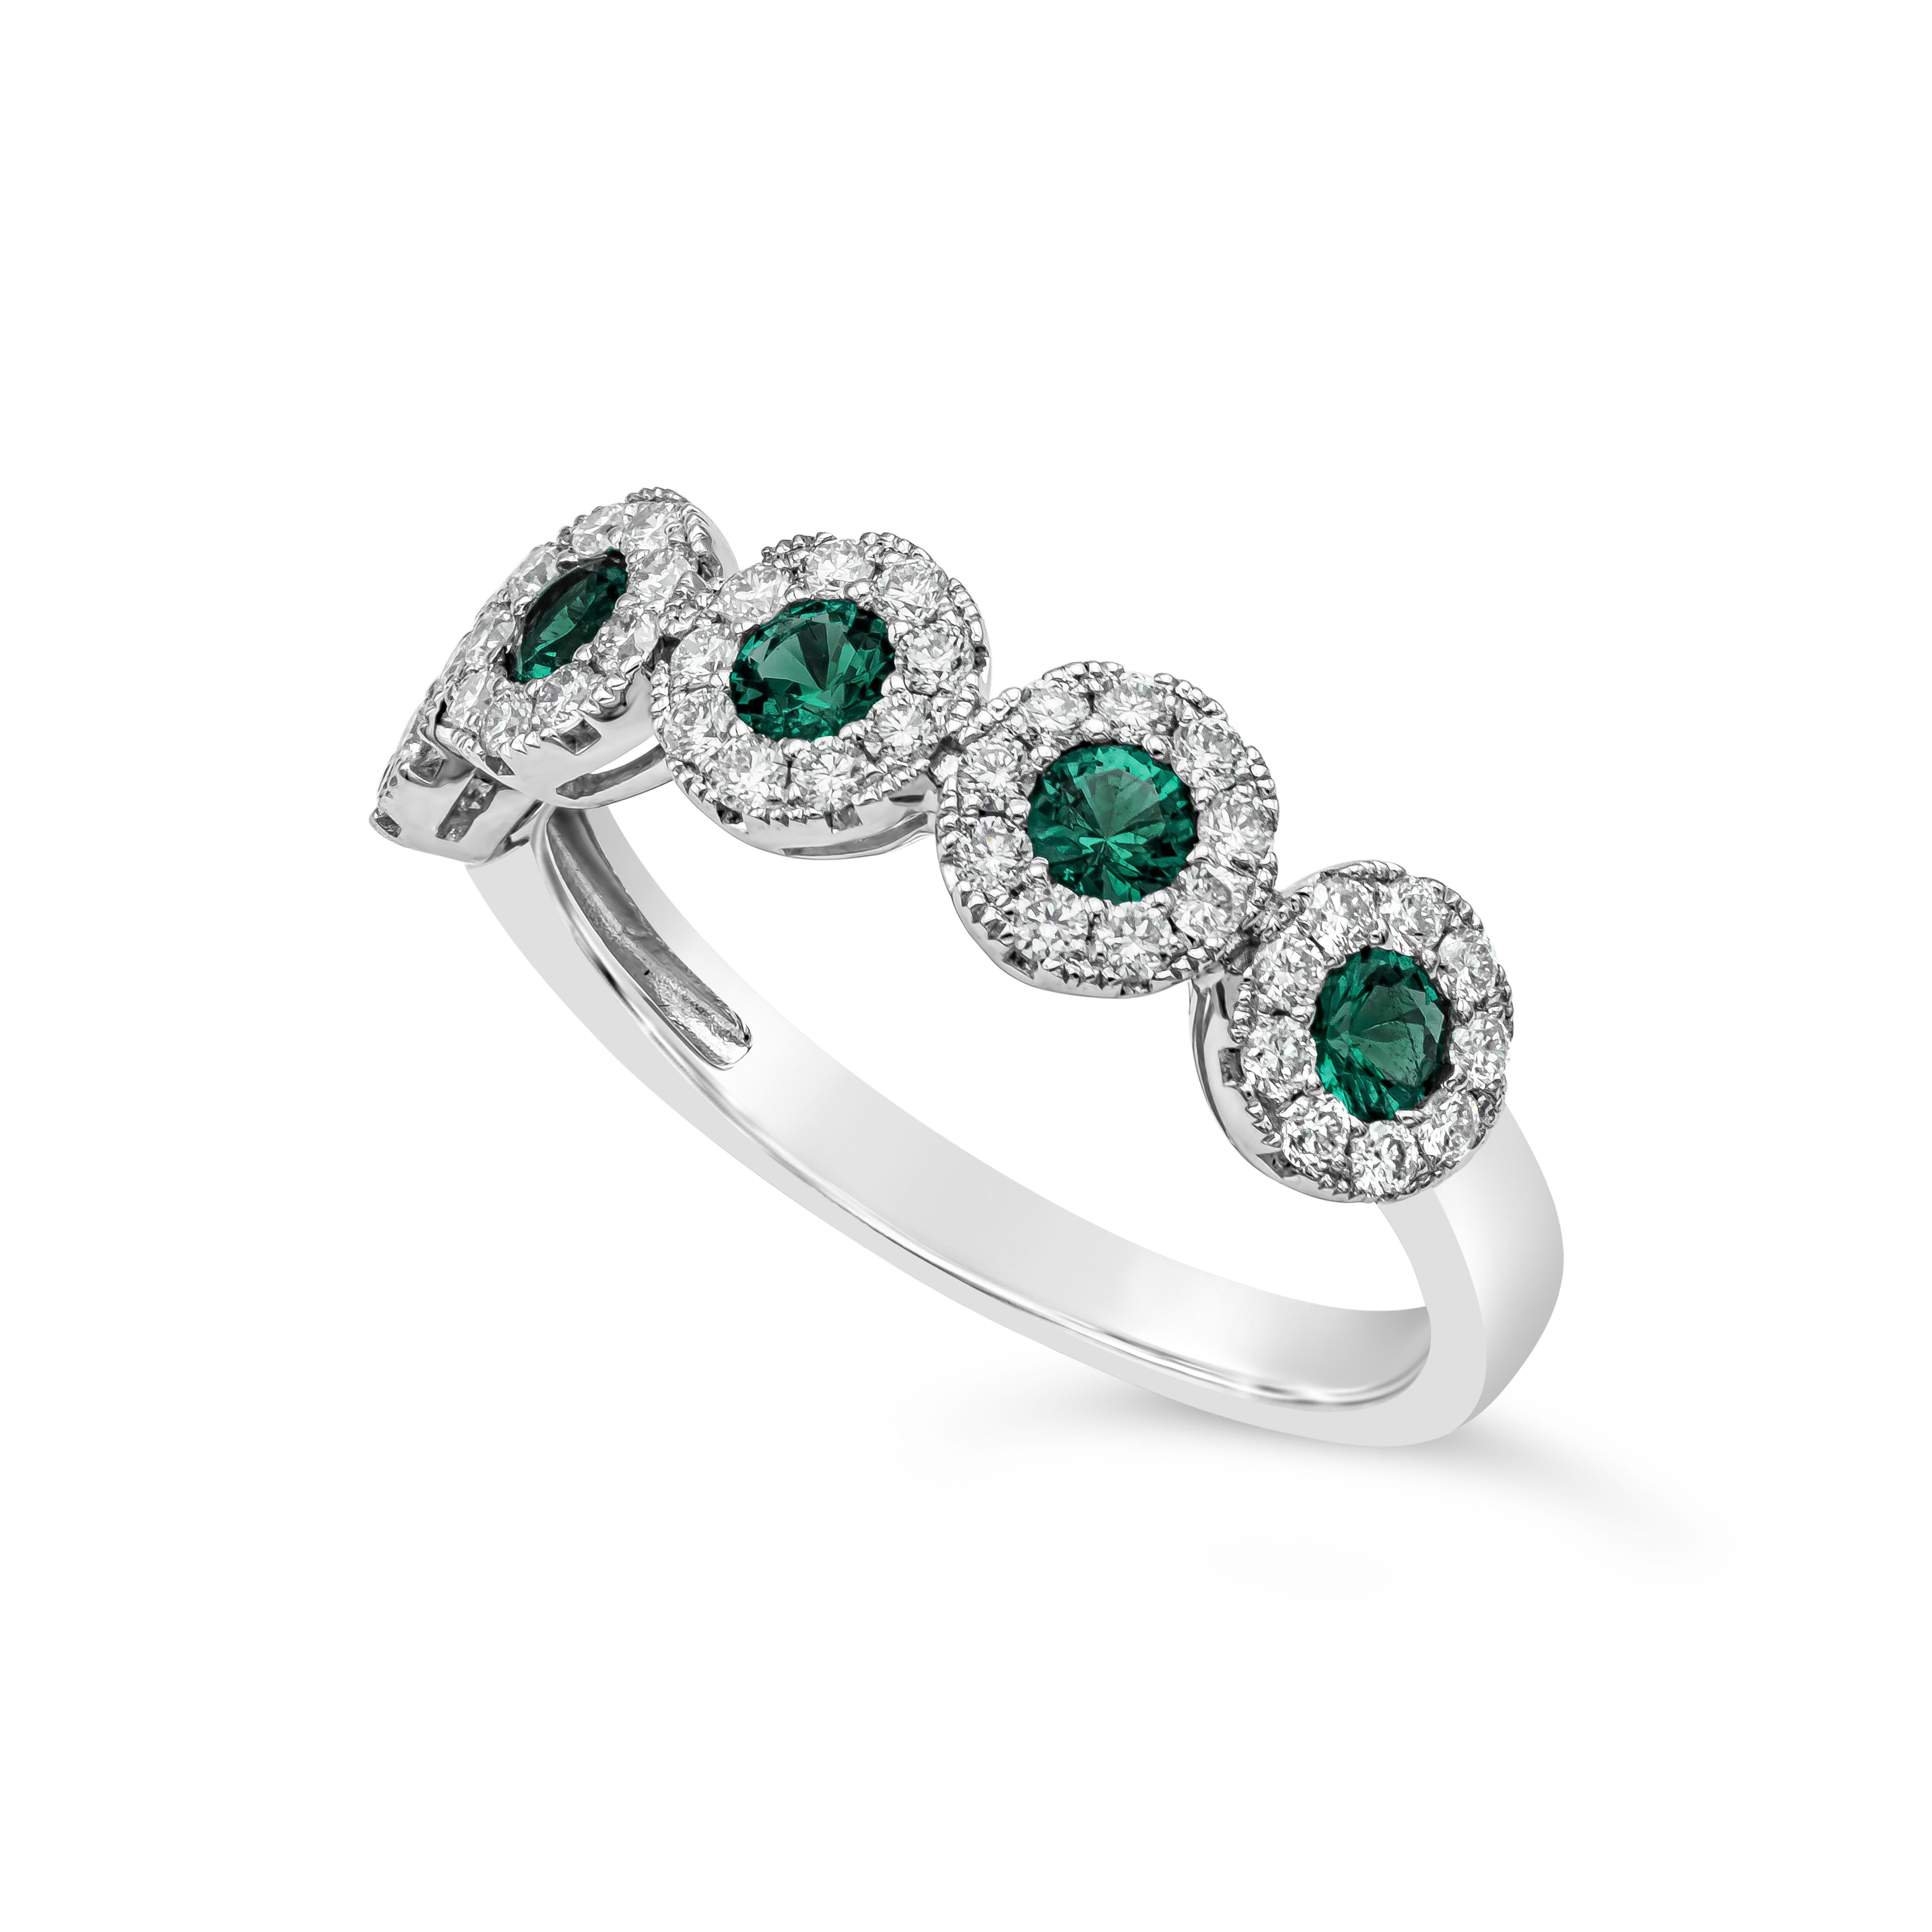 A fashionable and chic style ring showcasing 5 vibrant green emerald surrounded by 45 round brilliant diamonds. Set in 18 karat white gold. Green emerald weigh 0.35 carats total; diamonds weigh 0.39 carats total, FG color and VS/SI clarity.

Roman